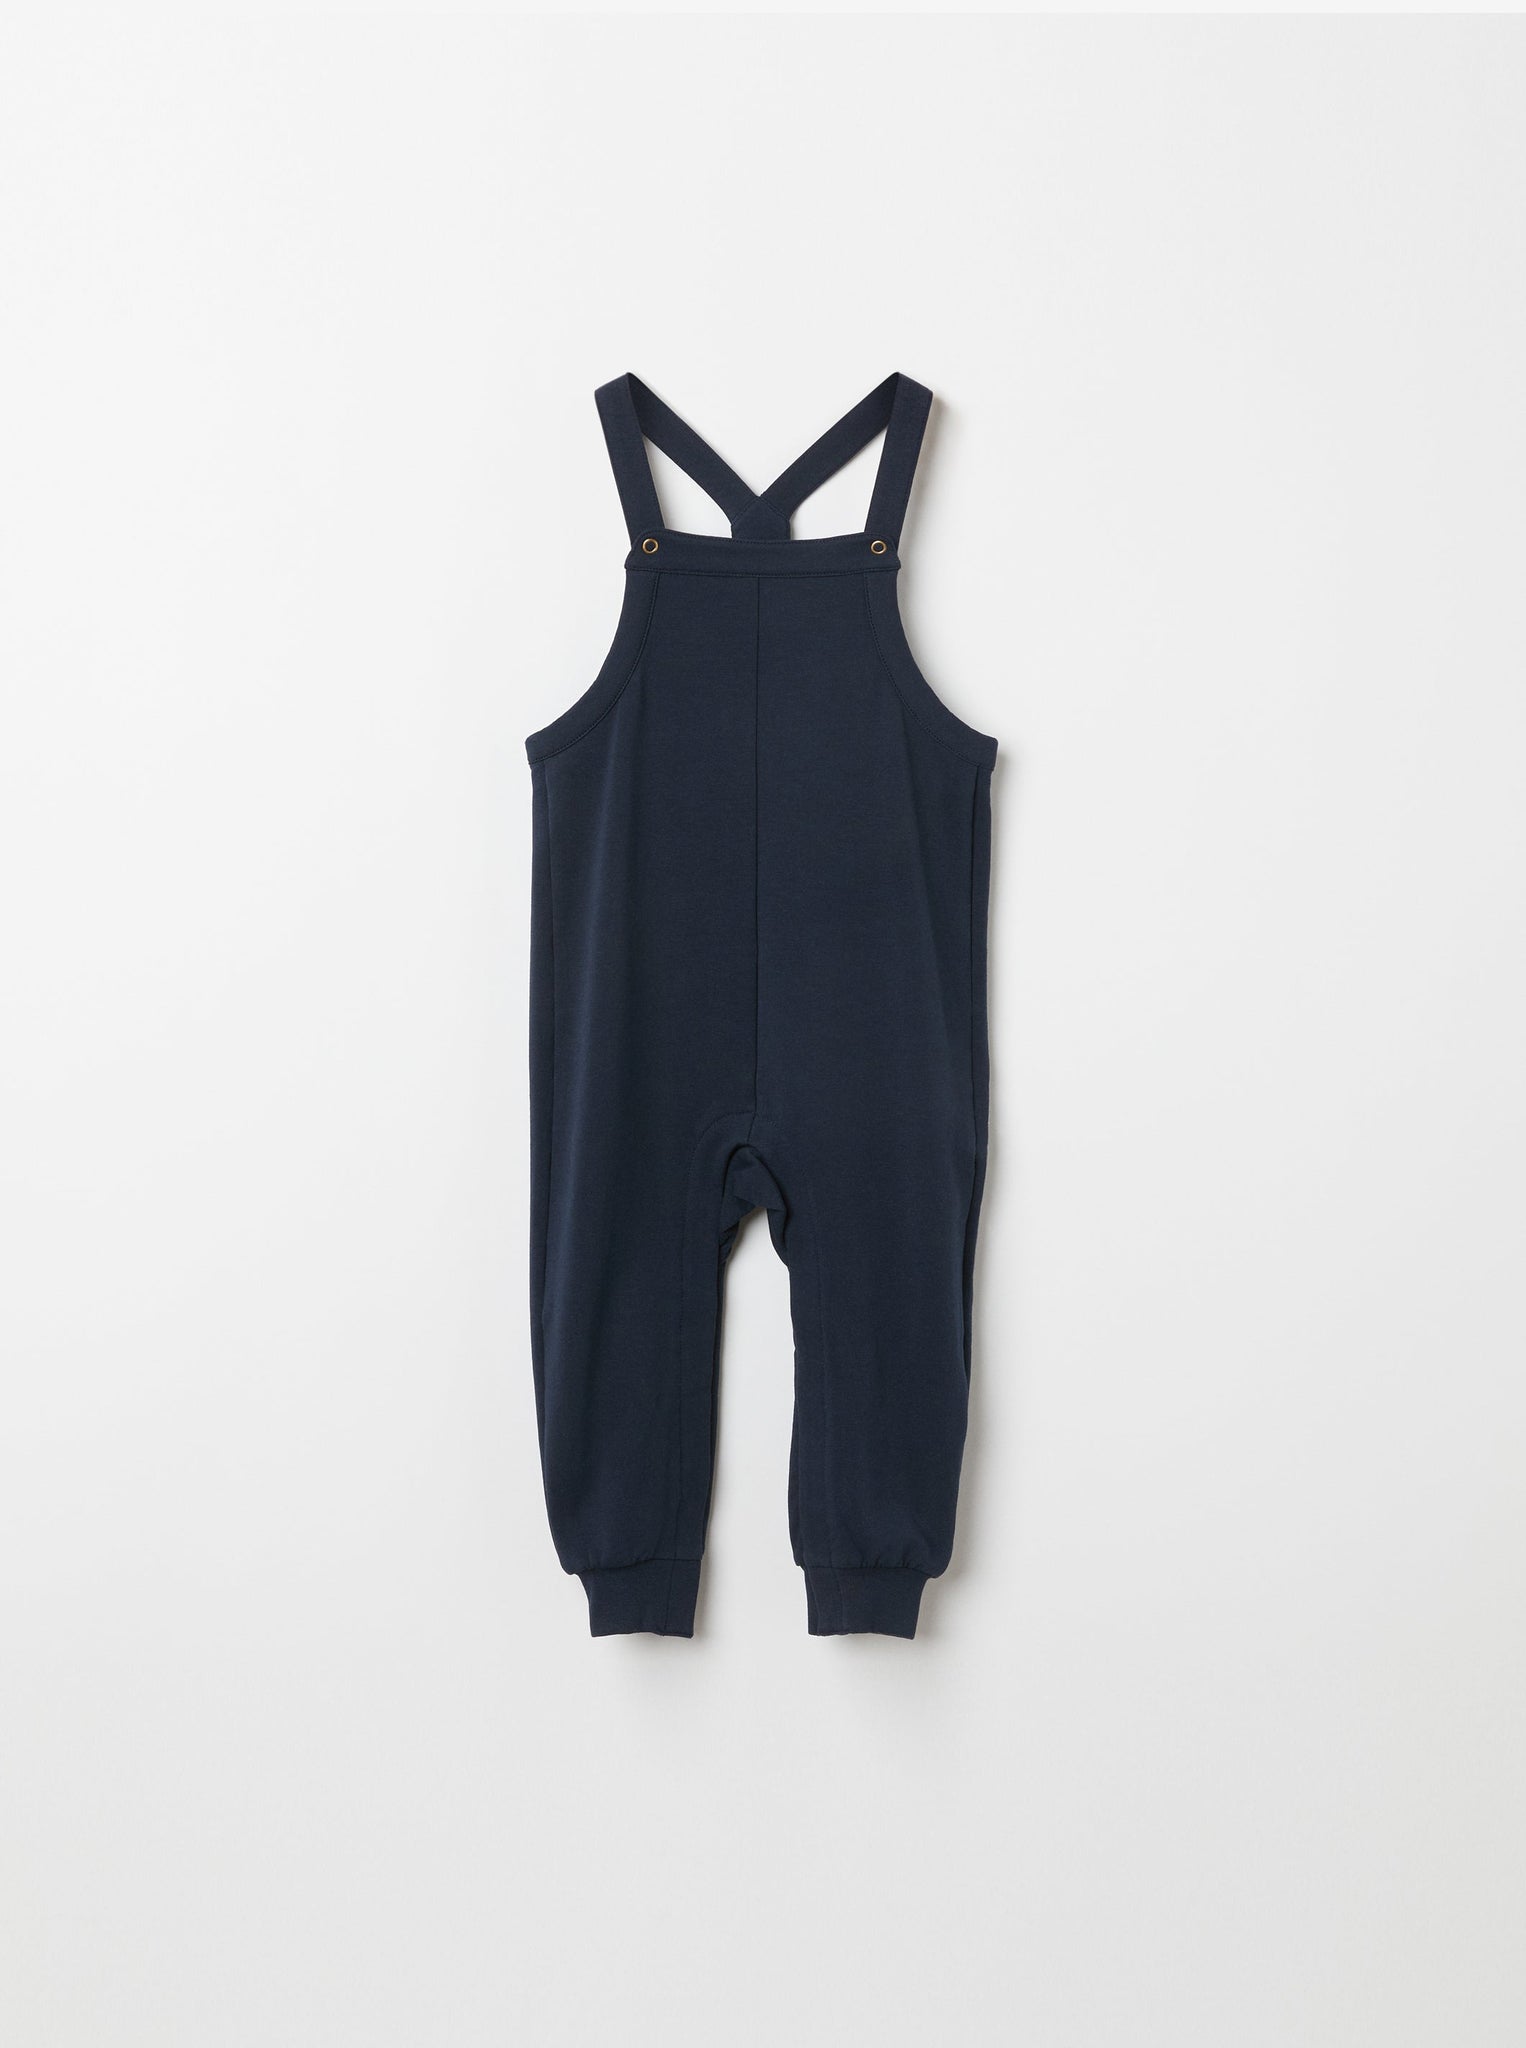 Organic Cotton Navy Baby Dungarees from the Polarn O. Pyret baby collection. Nordic baby clothes made from sustainable sources.